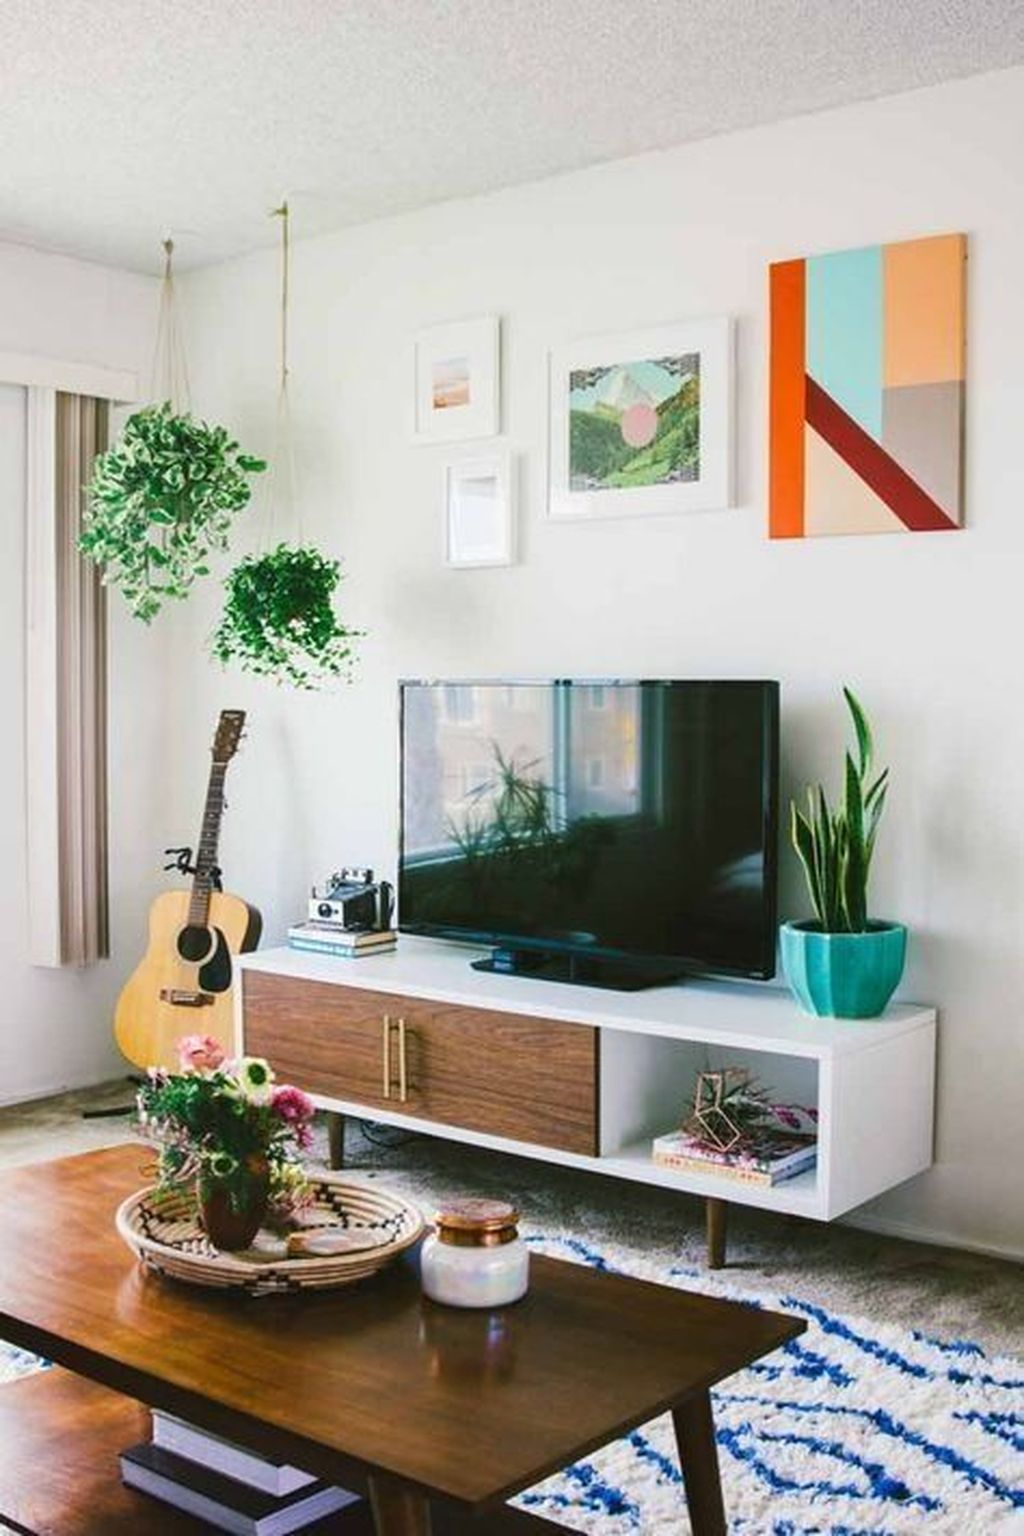 Rustic Modern Apartment Decorating Ideas: Embrace The Beauty Of Nature